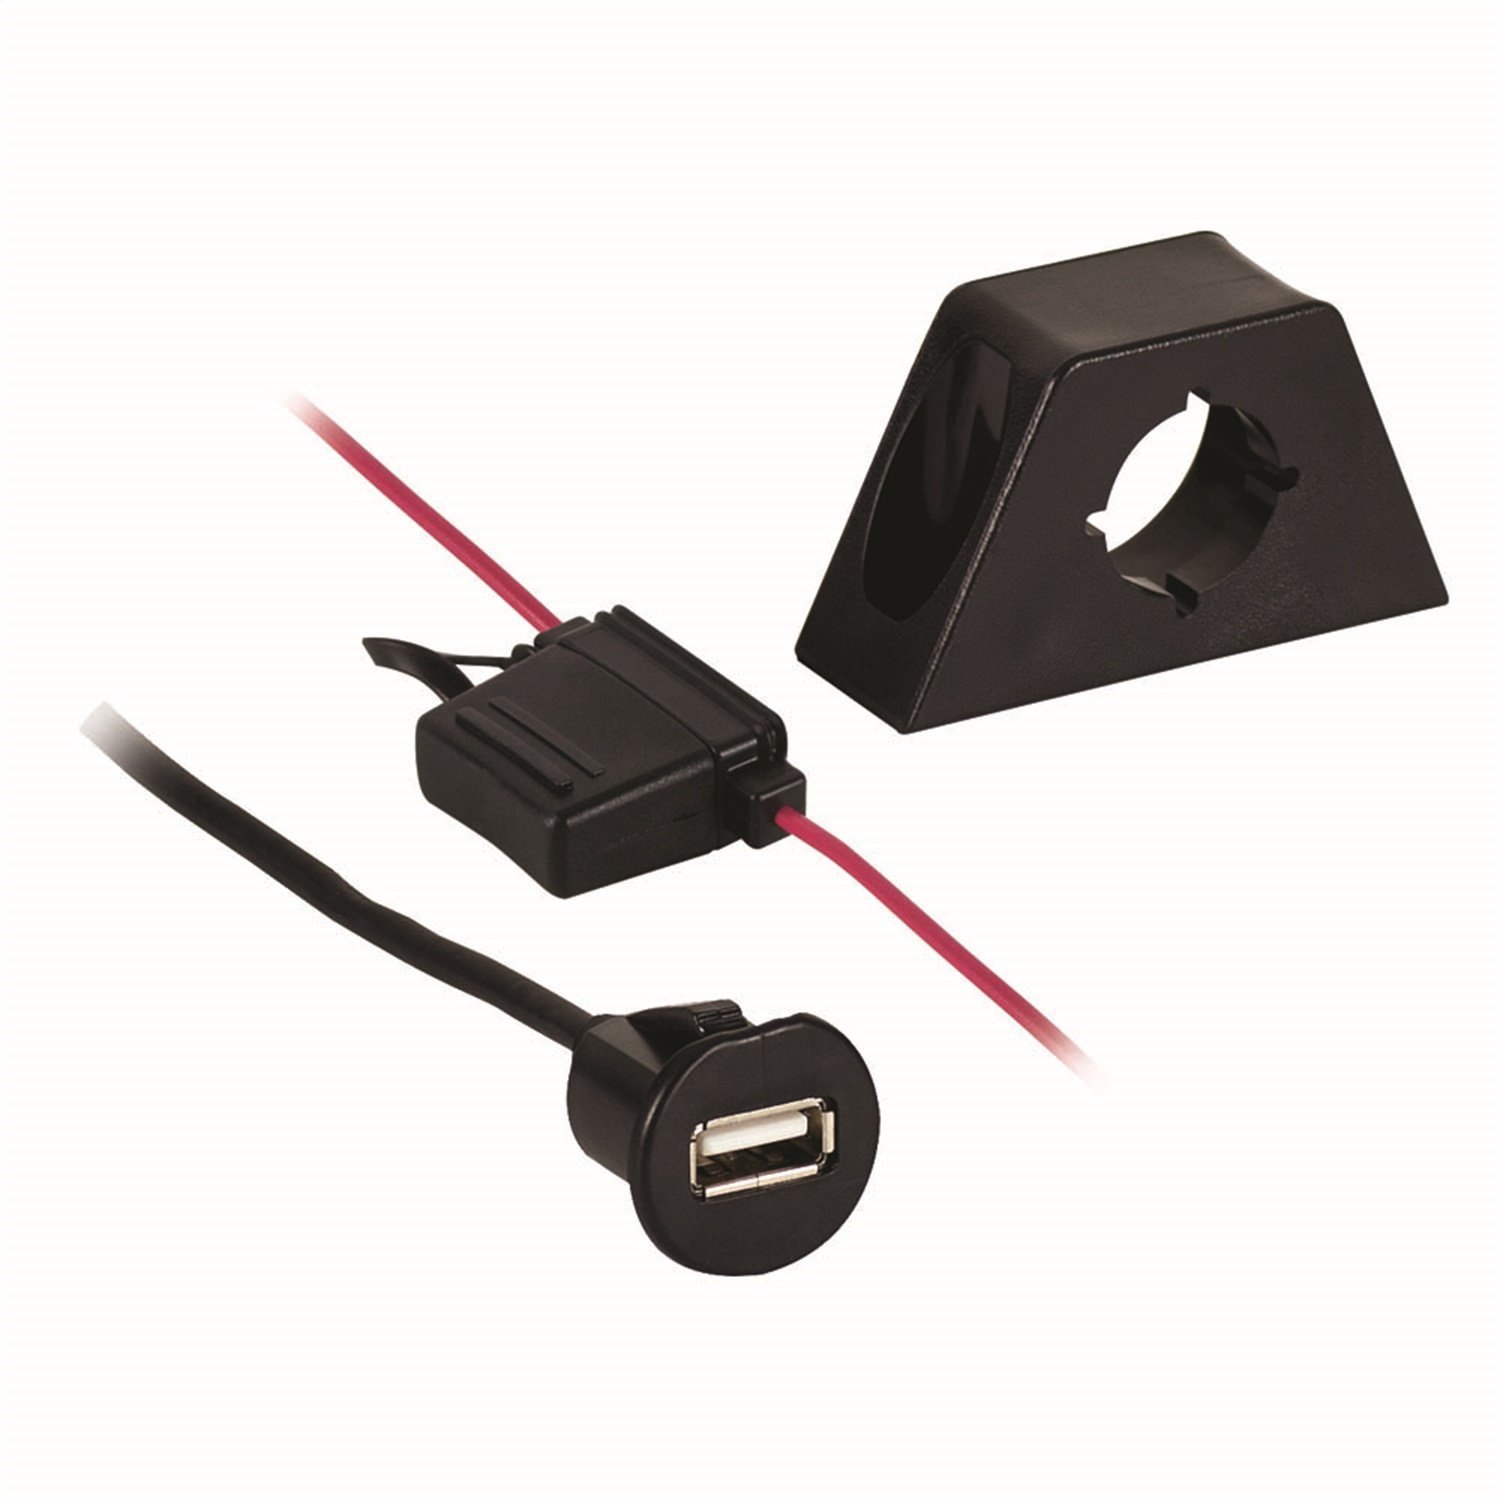 AXUSB-CP 2.1 Amp USB Charger, Panel Mount